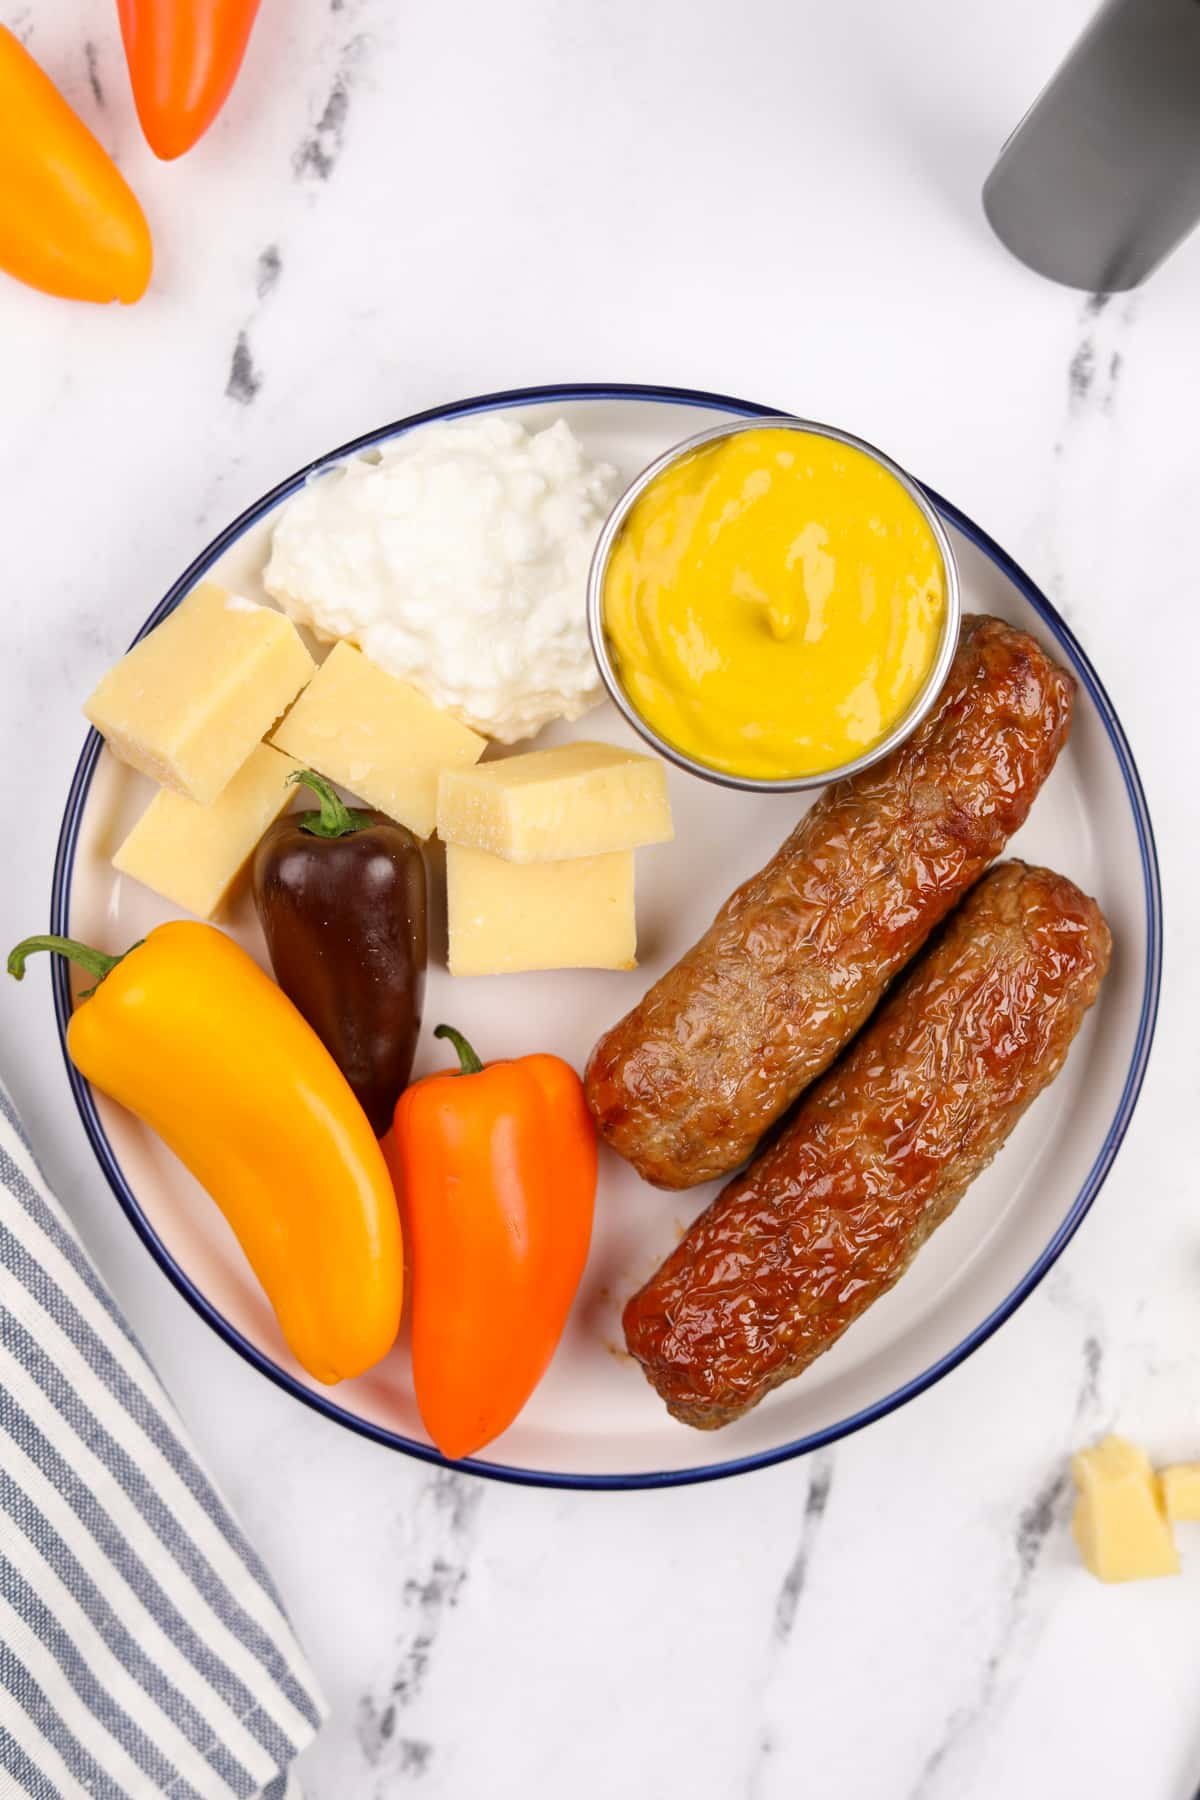 A plate filled with veggies, sausages, mustard, and cottage cheese.